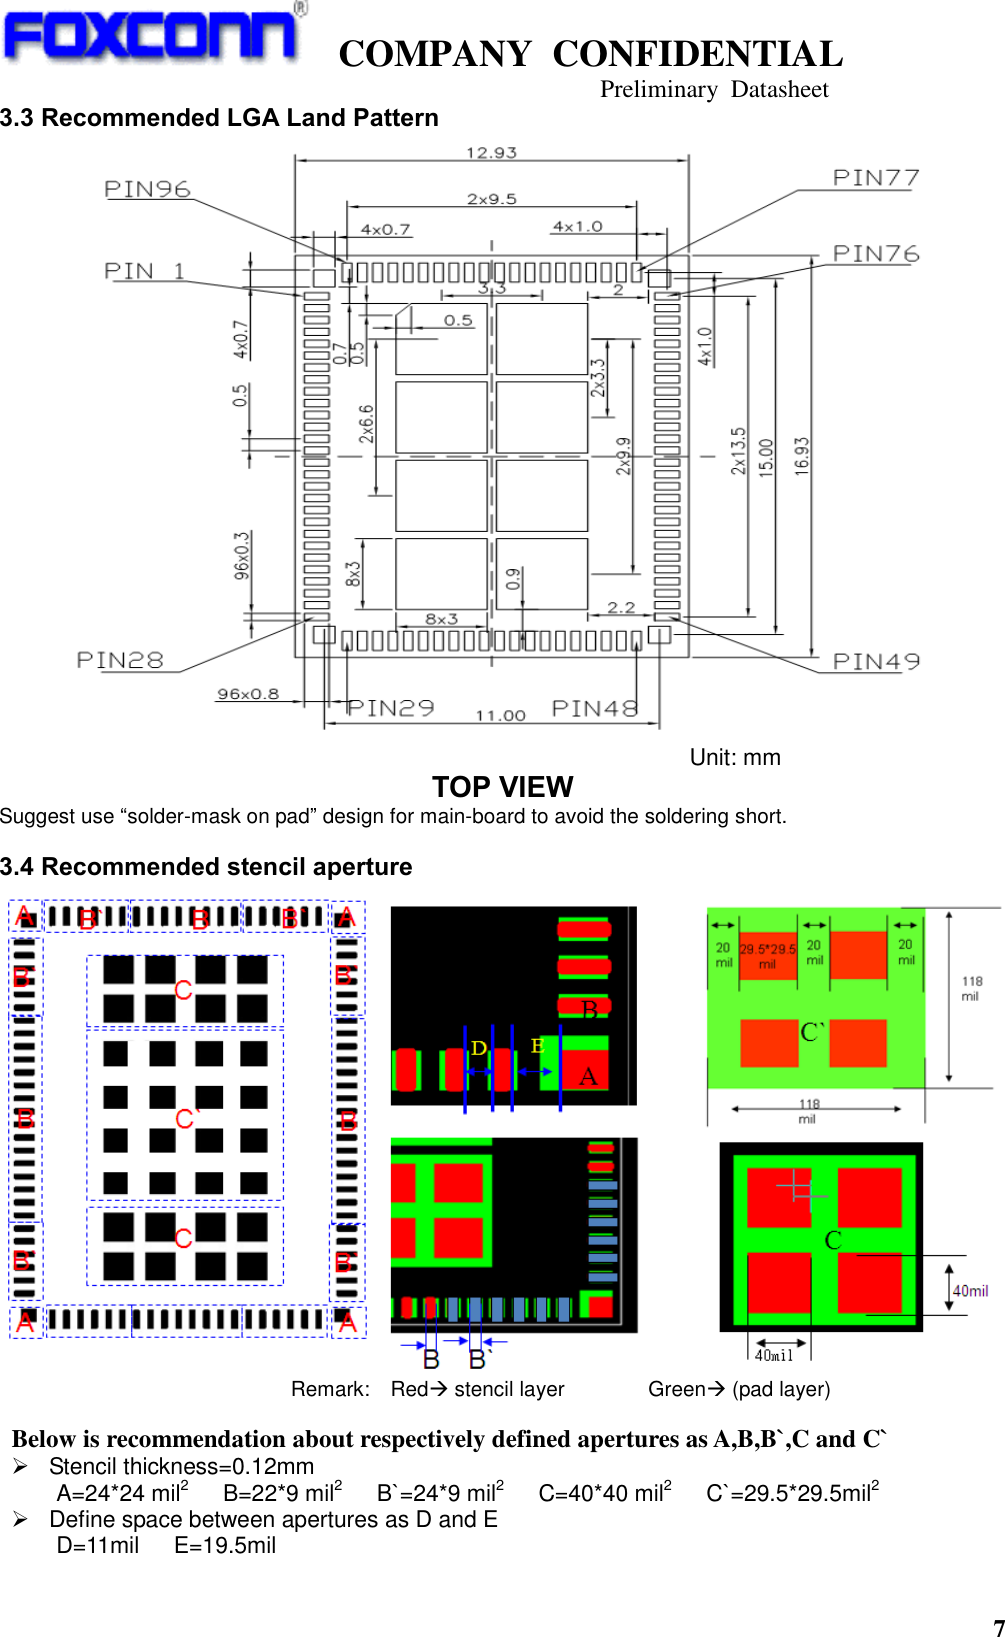   COMPANY  CONFIDENTIAL                                   Preliminary  Datasheet 7  3.3 Recommended LGA Land Pattern  Unit: mm TOP VIEW Suggest use “solder-mask on pad” design for main-board to avoid the soldering short. 3.4 Recommended stencil aperture  Remark:    Red stencil layer                Green (pad layer)      Below is recommendation about respectively defined apertures as A,B,B`,C and C`   Stencil thickness=0.12mm A=24*24 mil2    B=22*9 mil2   B`=24*9 mil2   C=40*40 mil2   C`=29.5*29.5mil2   Define space between apertures as D and E D=11mil      E=19.5mil 